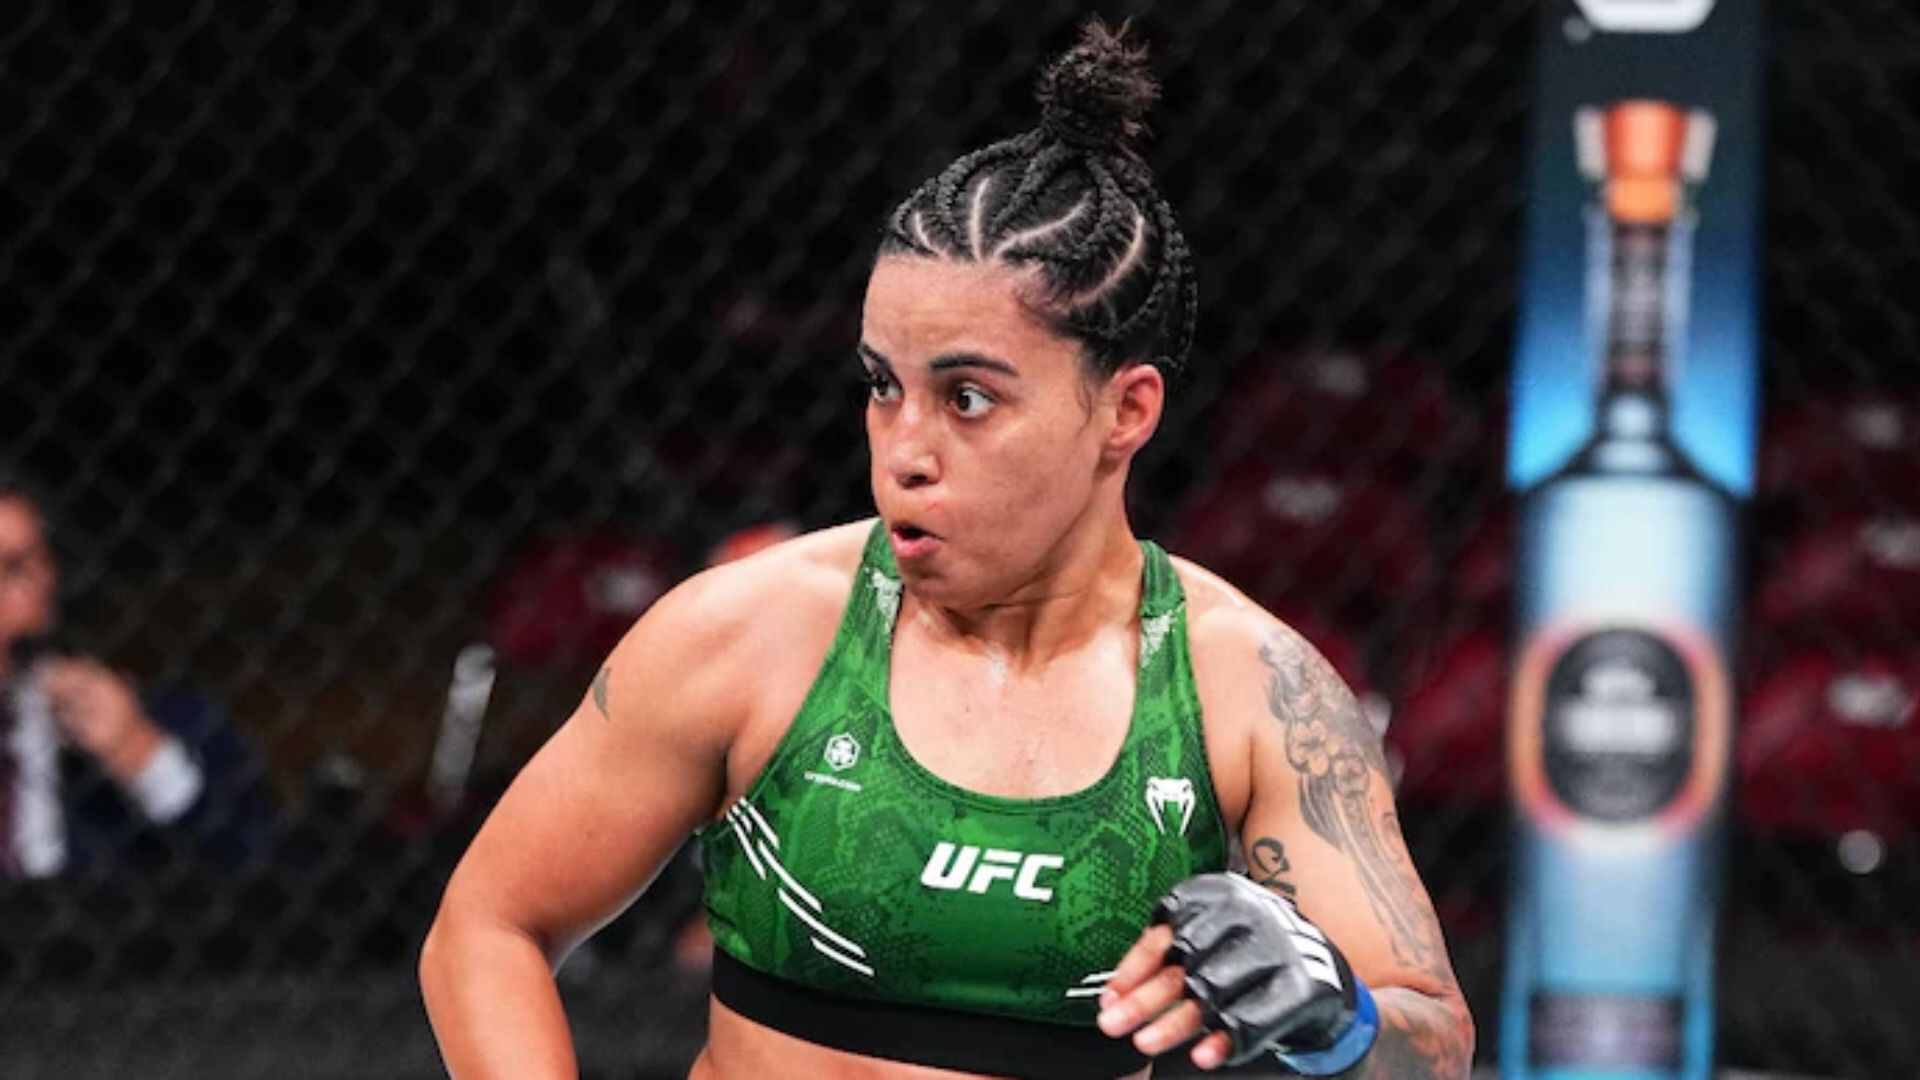 Puja Tomar Makes UFC History As First Indian Fighter To Win - Watch the Moment